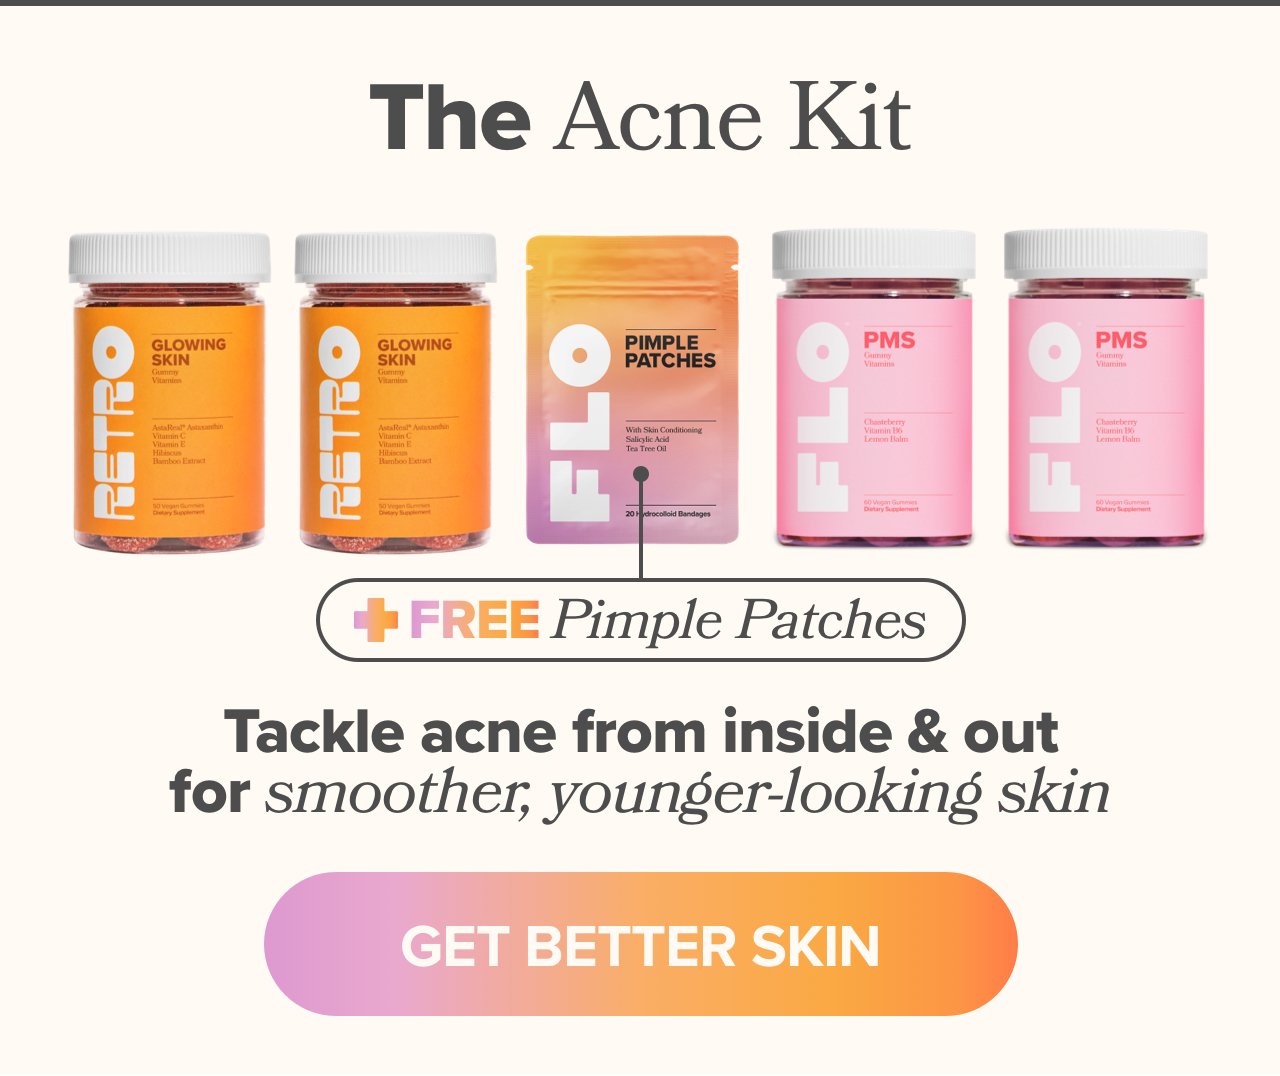 The Acne Kit - Tackle acne from inside & out for smoother, younger-looking skin + FREE Pimple Patches